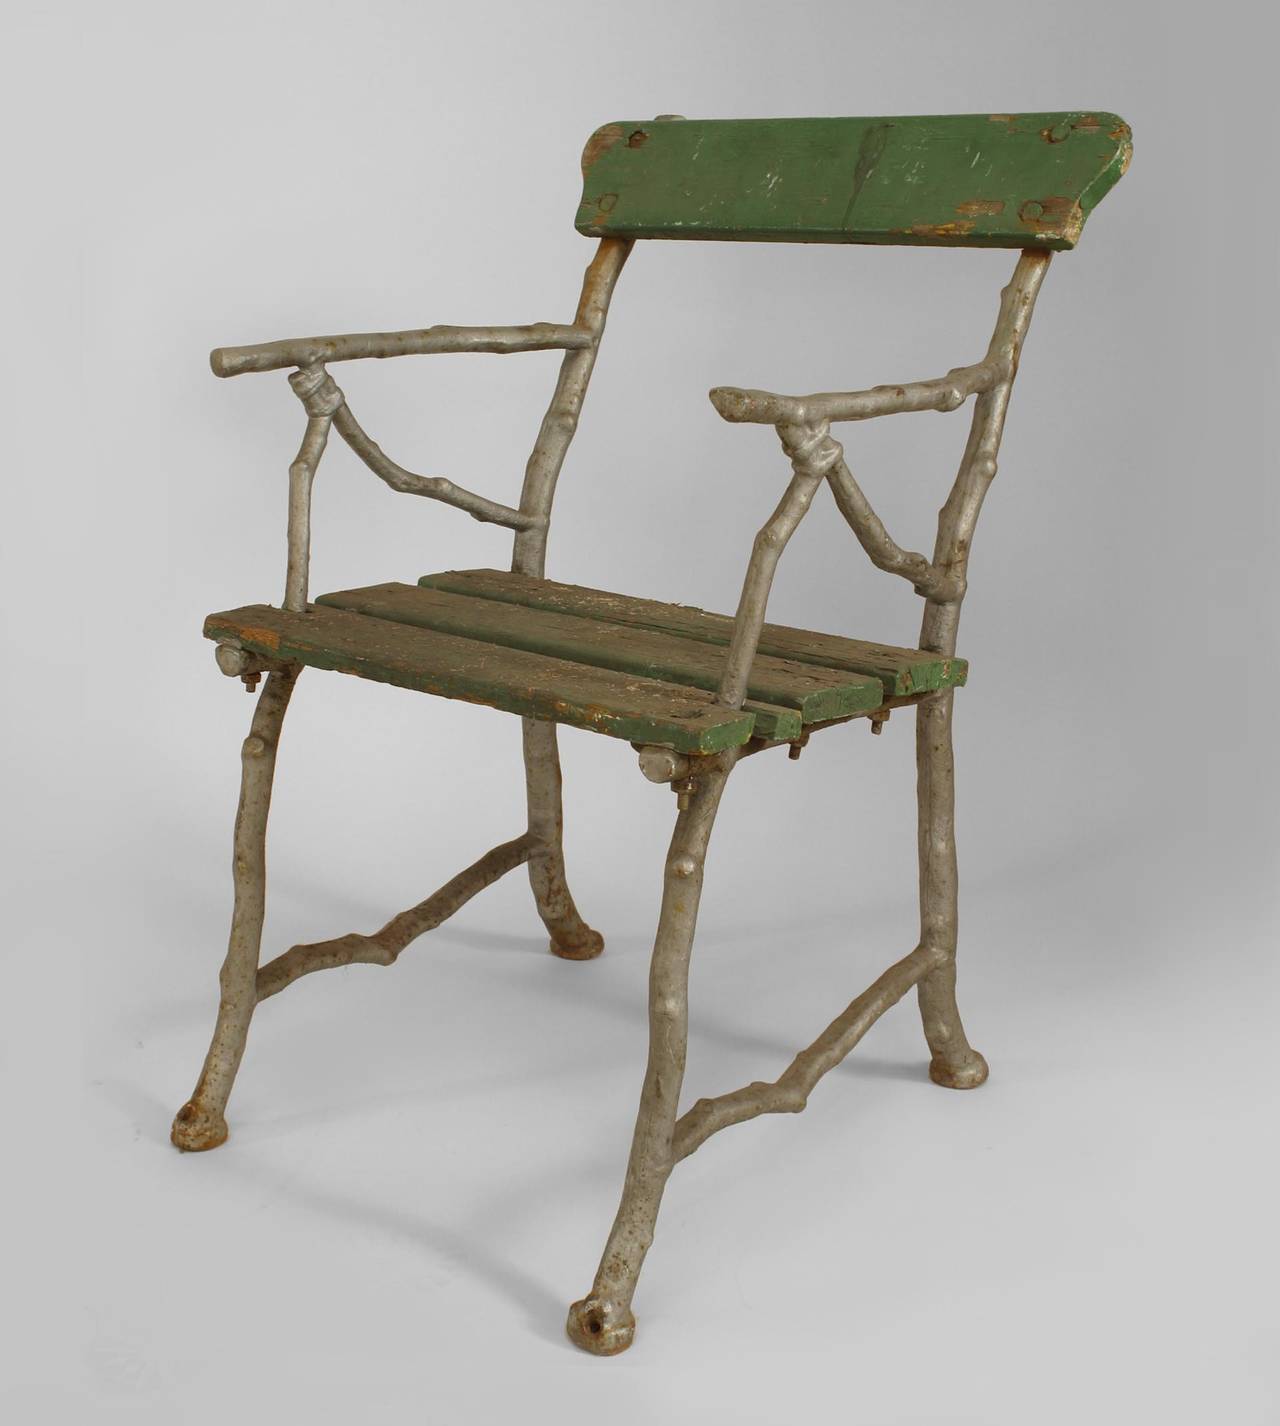 Outdoor English Victorian painted iron arm chair with faux twig design and painted slat seat and back.
